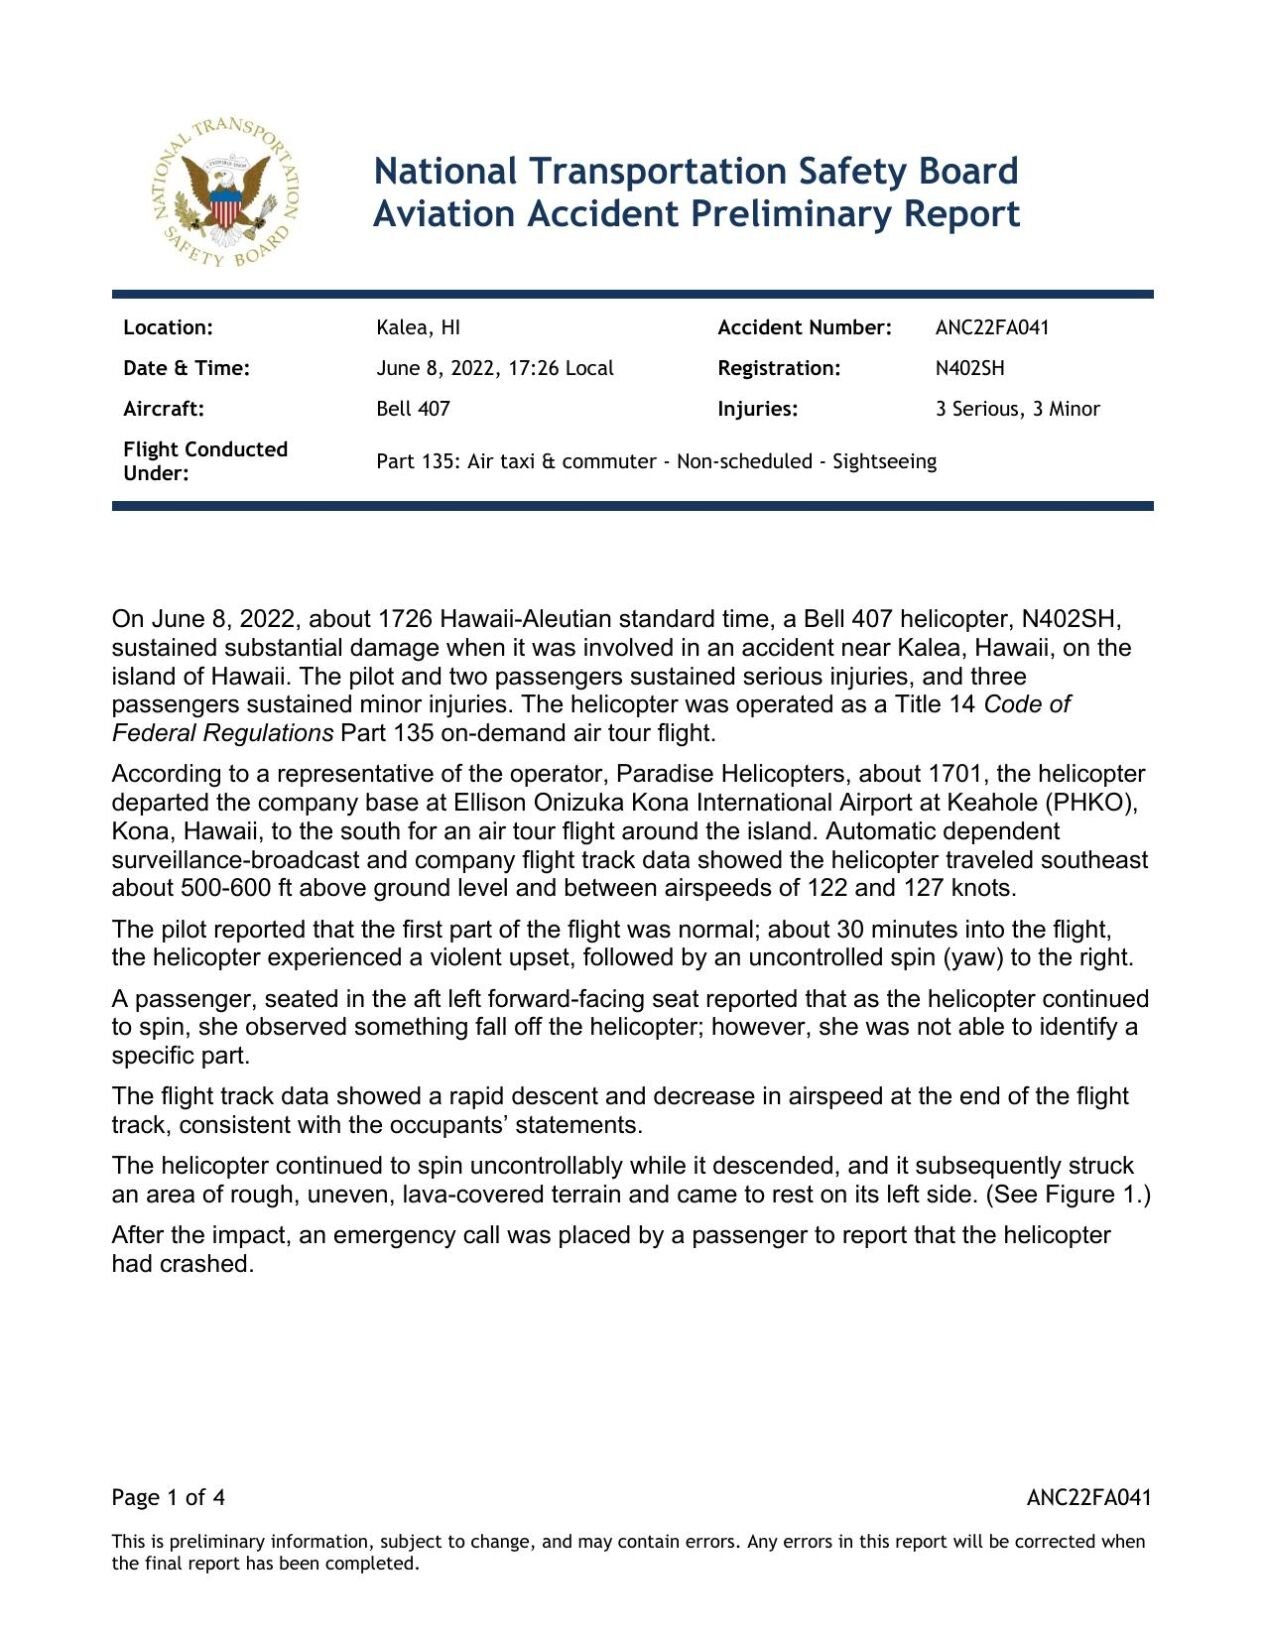 Paradise Helicopters crash report